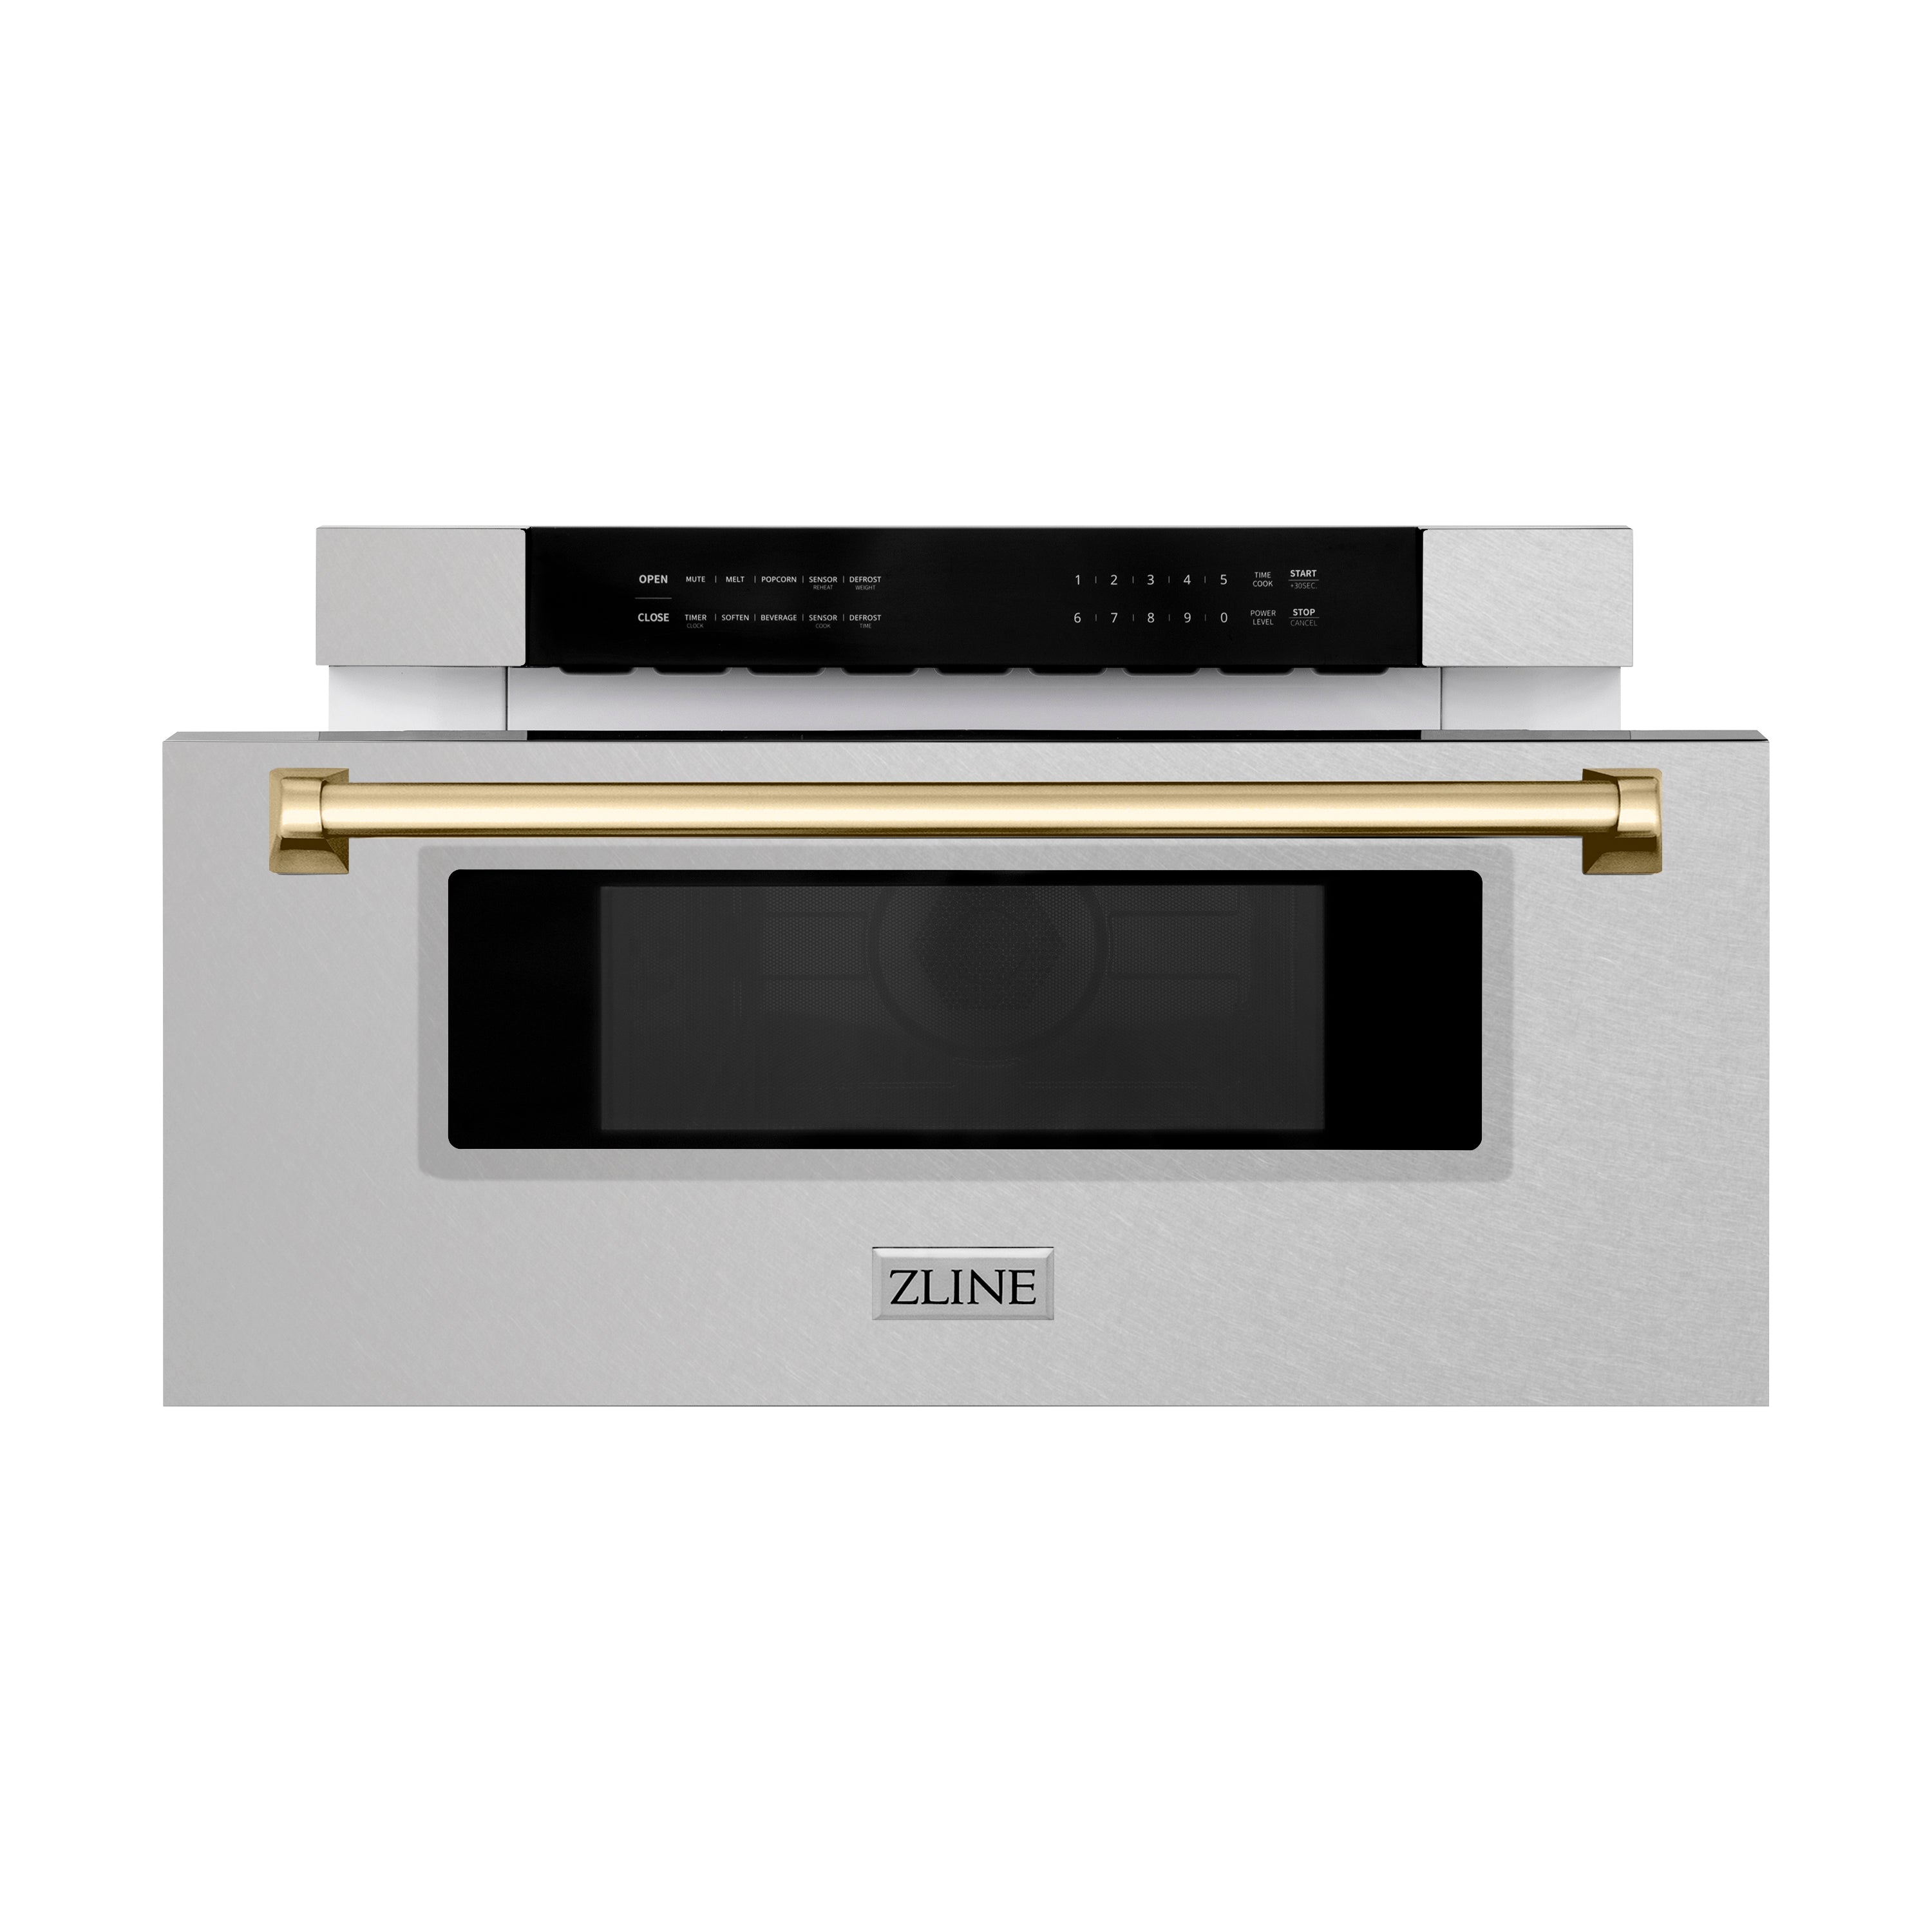 ZLINE Autograph Edition 30" 1.2 cu. ft. Built-In Microwave Drawer in DuraSnow Stainless Steel with Accents (MWDZ-30) - New Star Living